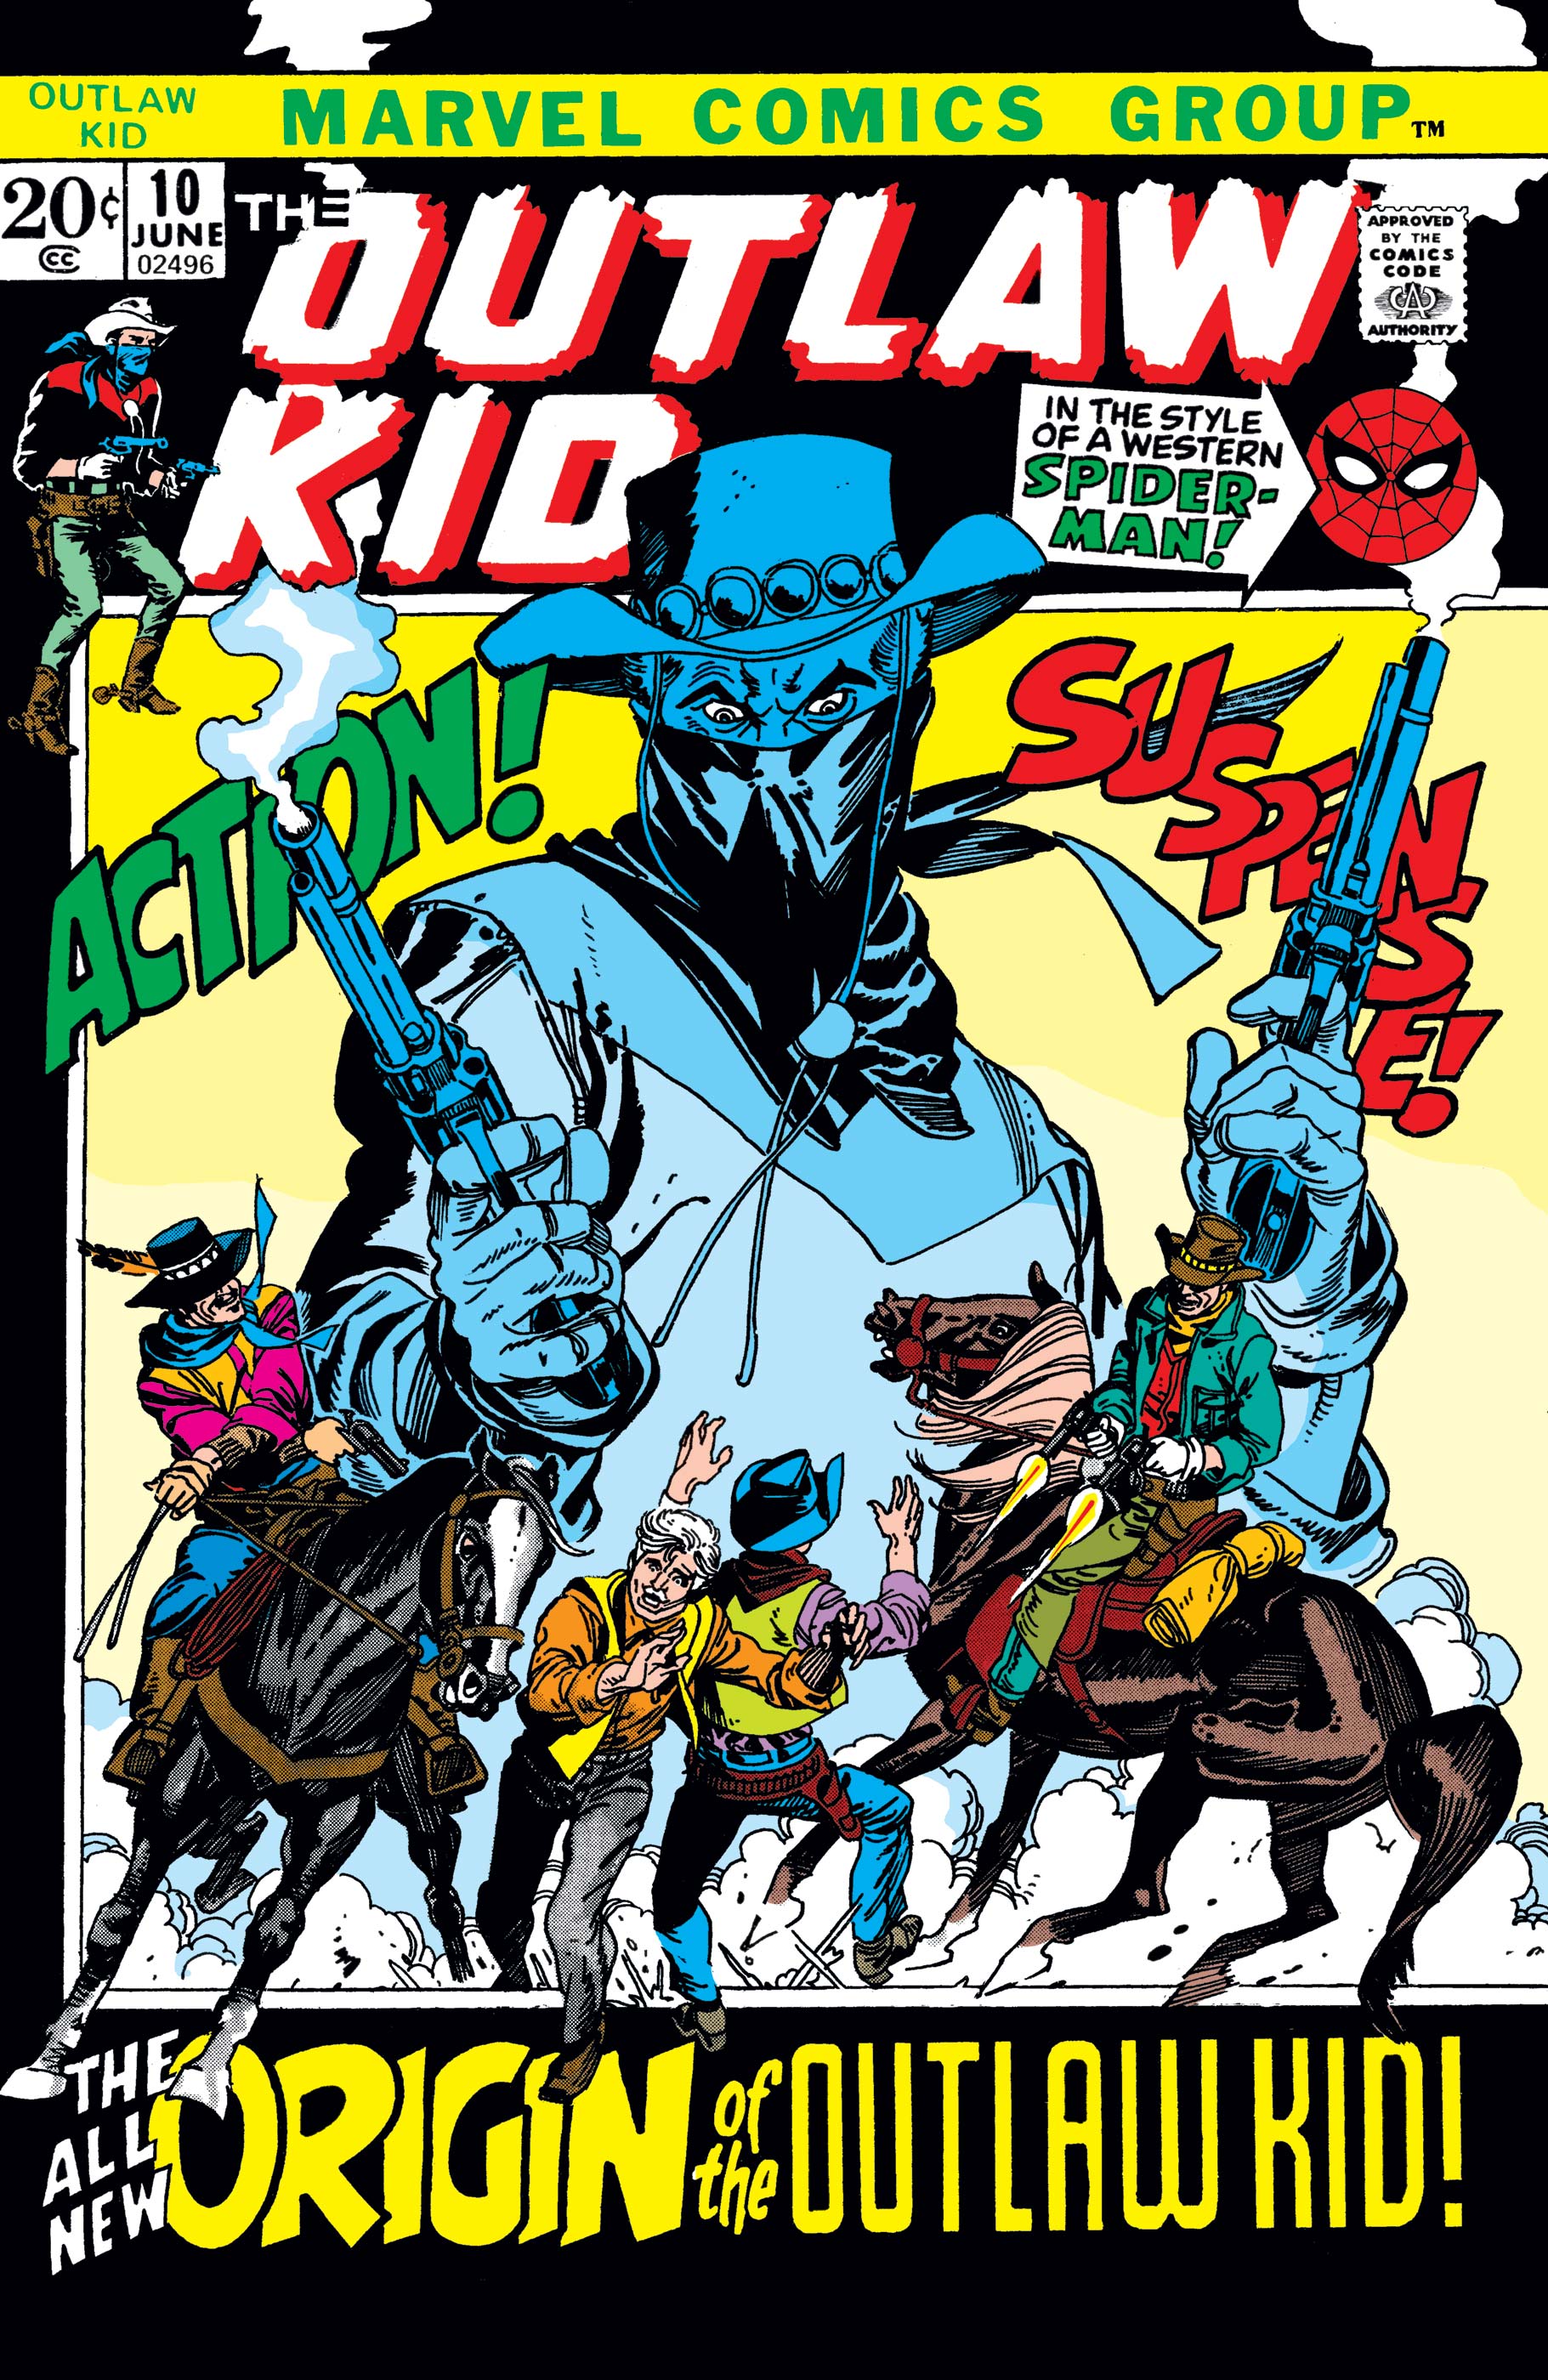 Outlaw Kid (1970) #10